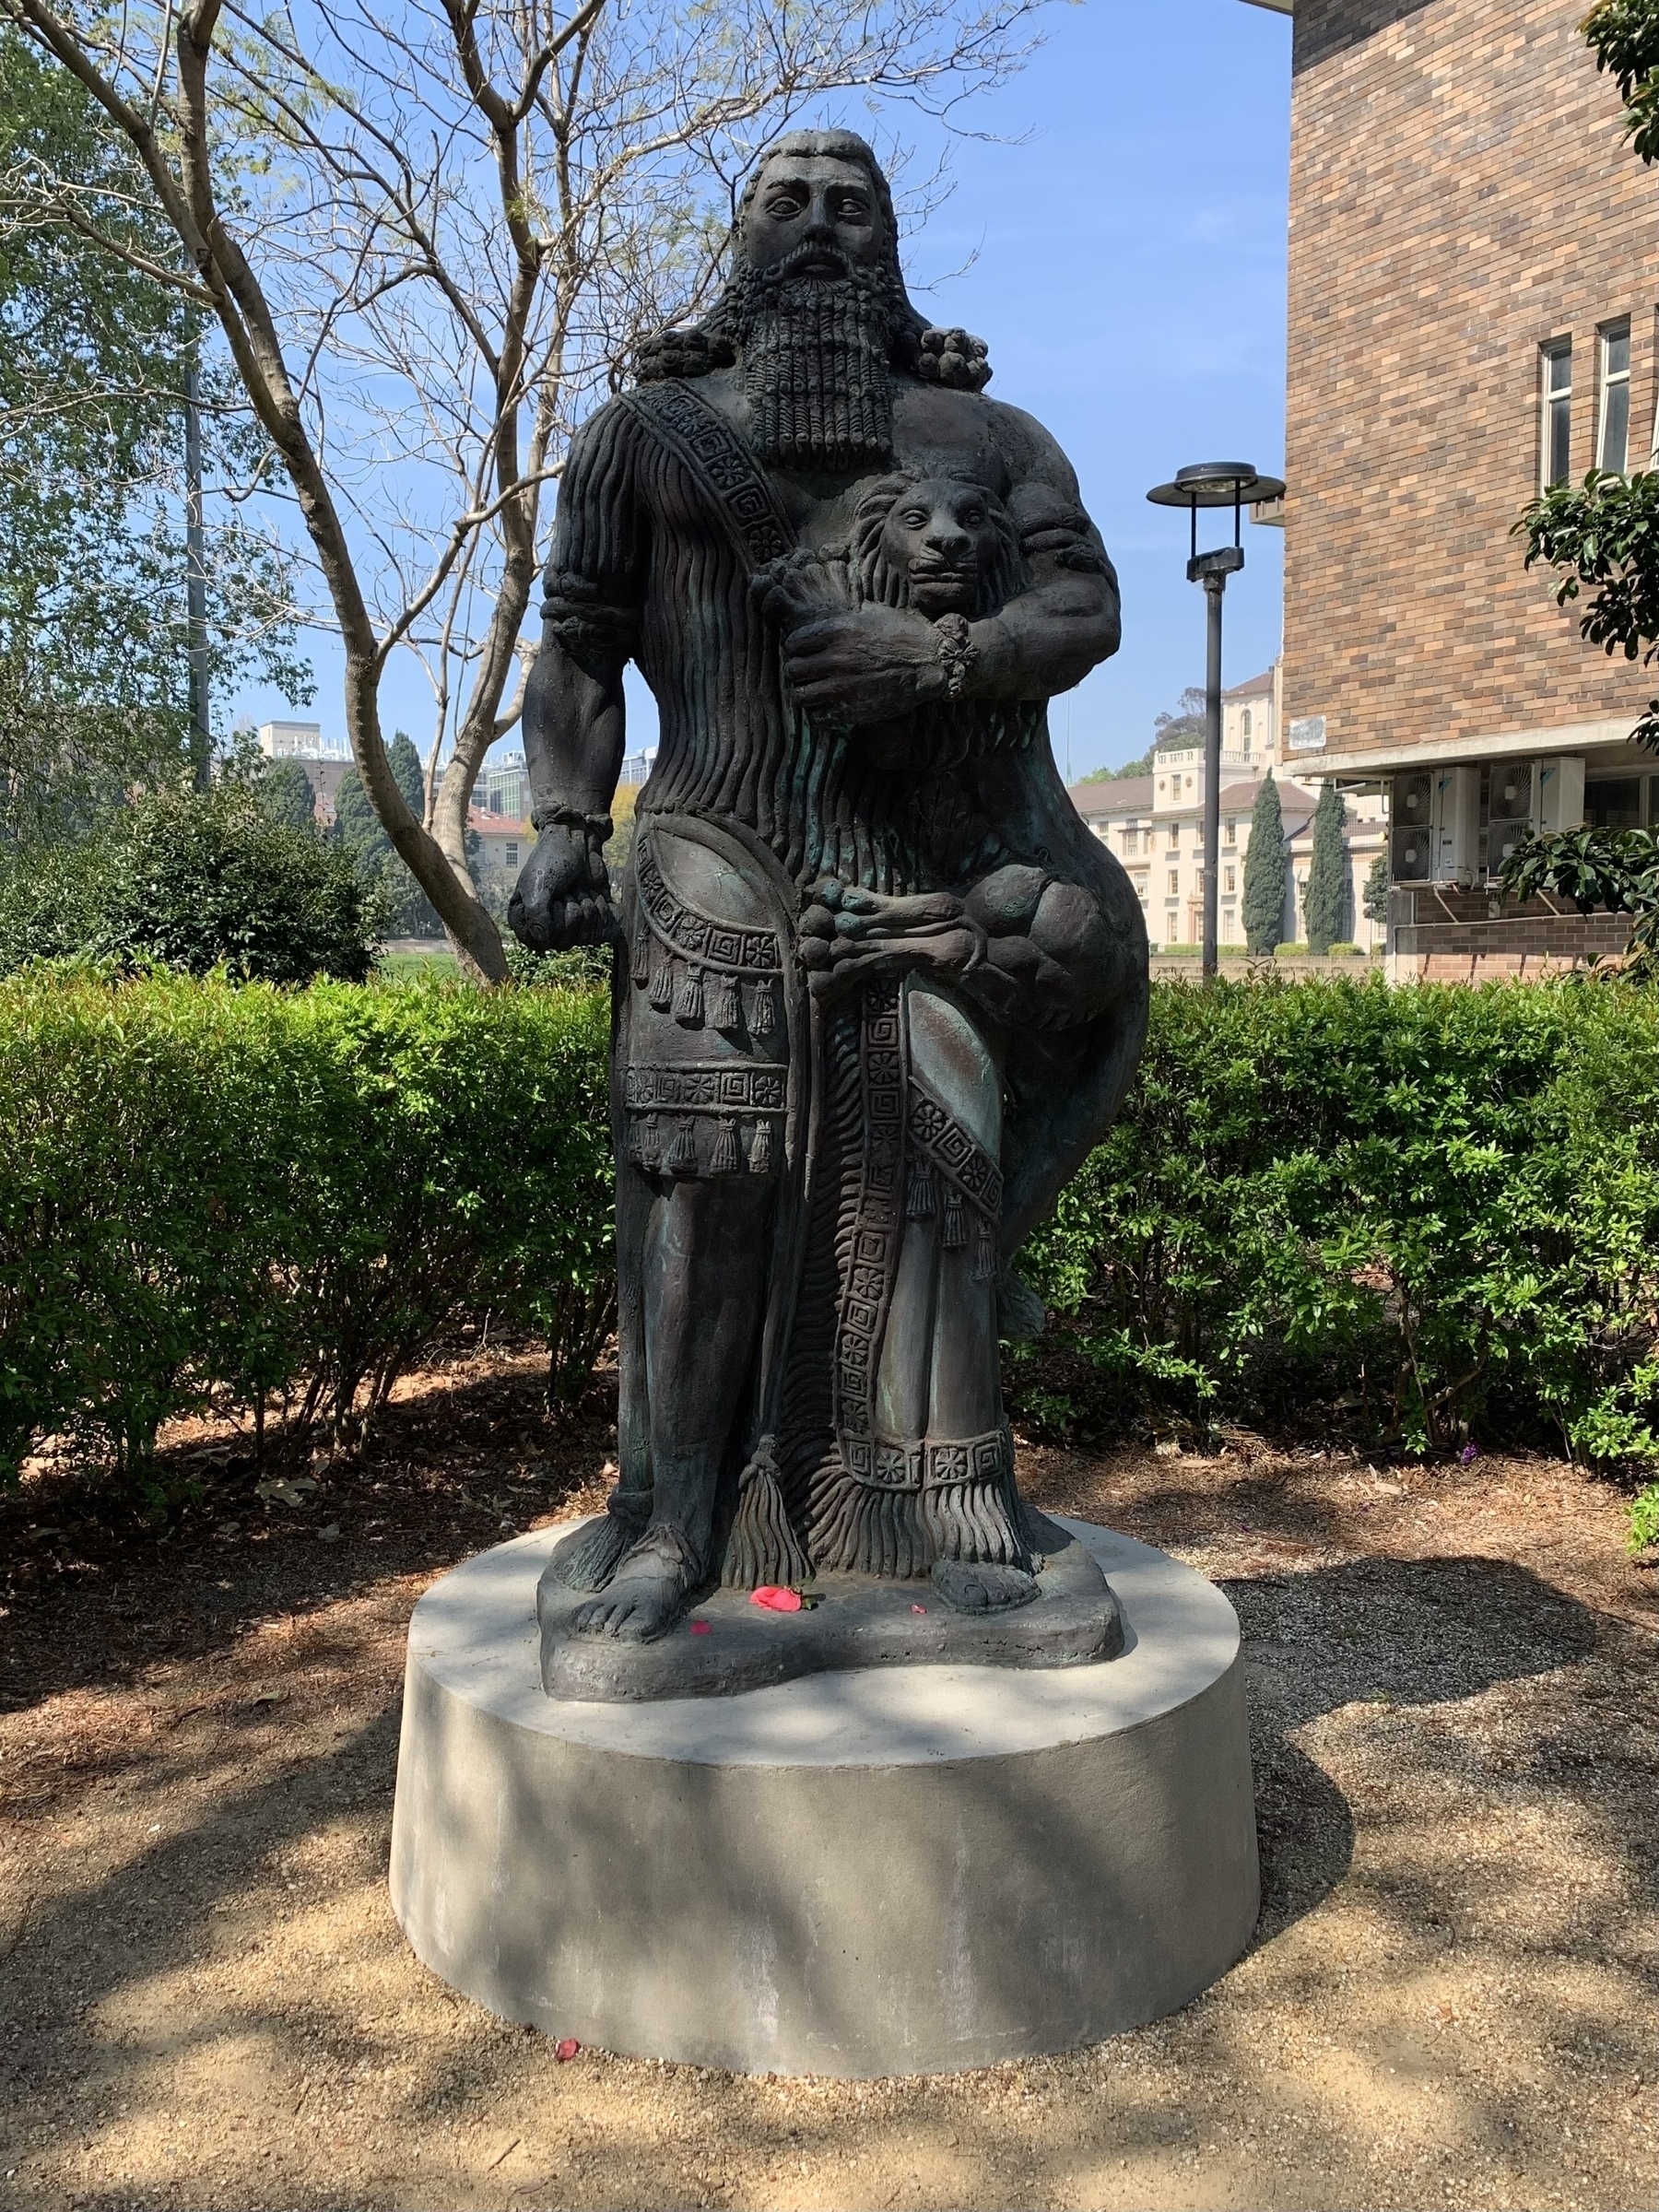 Metal statue on a concrete base. Statue is of a muscular, human-sized god/man dressed like a warrior king, grasping a lion in a headlock under his left arm